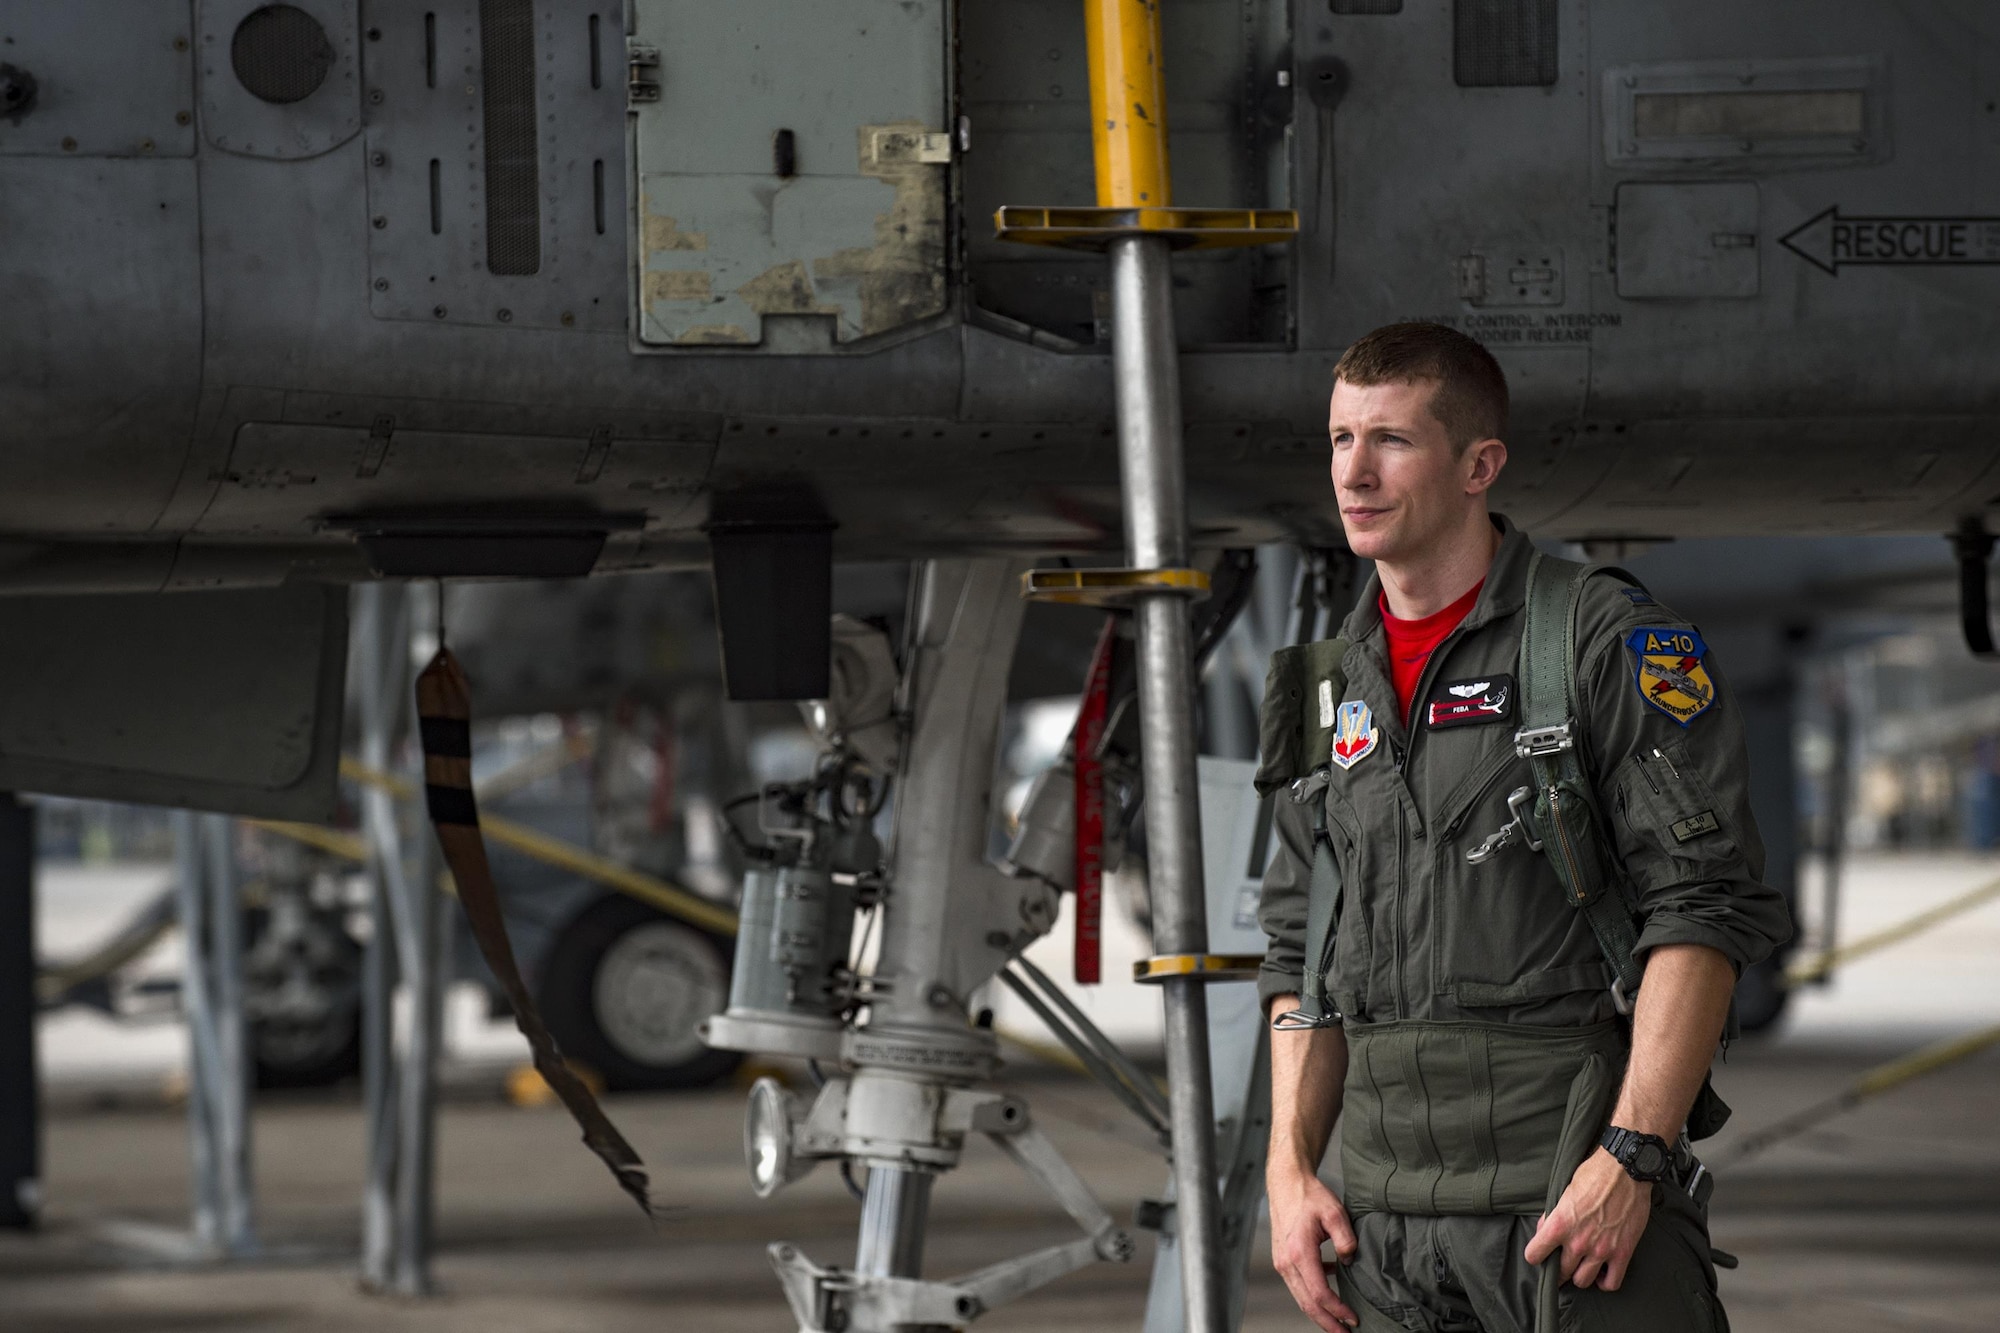 An A-10C Thunderbolt II pilot from the 75th Fighter Squadron stands near his aircraft prior to take off, April 28, 2017, at Moody Air Force Base, Ga. The 75th FS departed for Combat Hammer, an air-to-ground exercise hosted at Hill Air Force Base, Utah. The exercise is designed to collect and analyze data on the performance of precision weapons and measure their suitability for use in combat. (U.S. Air Force photo by Andrea Jenkins)